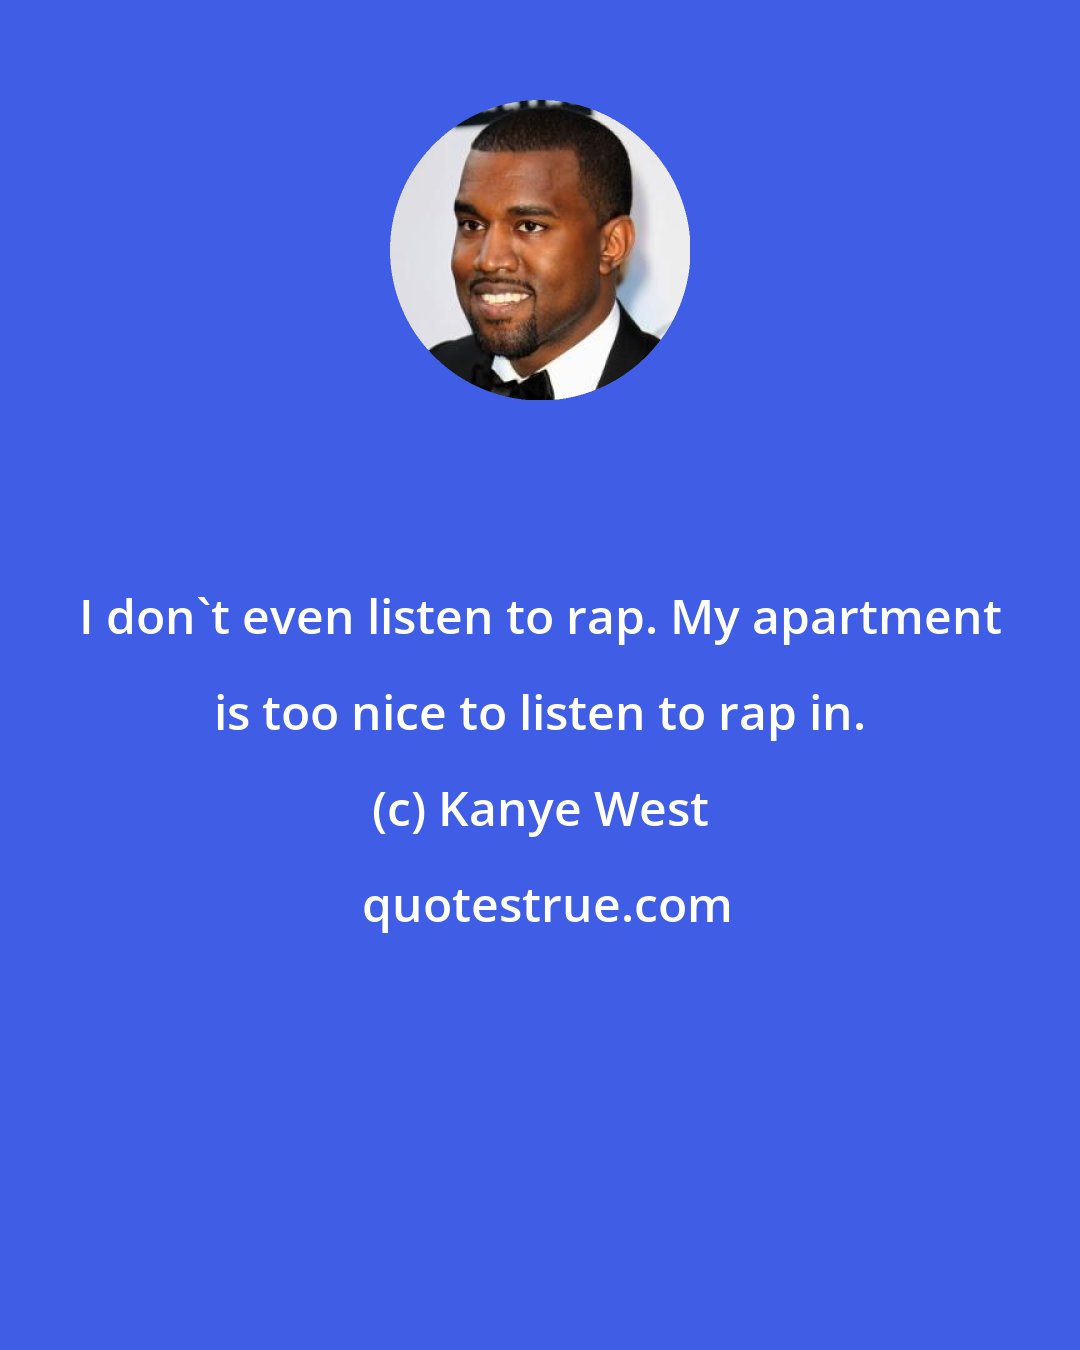 Kanye West: I don't even listen to rap. My apartment is too nice to listen to rap in.